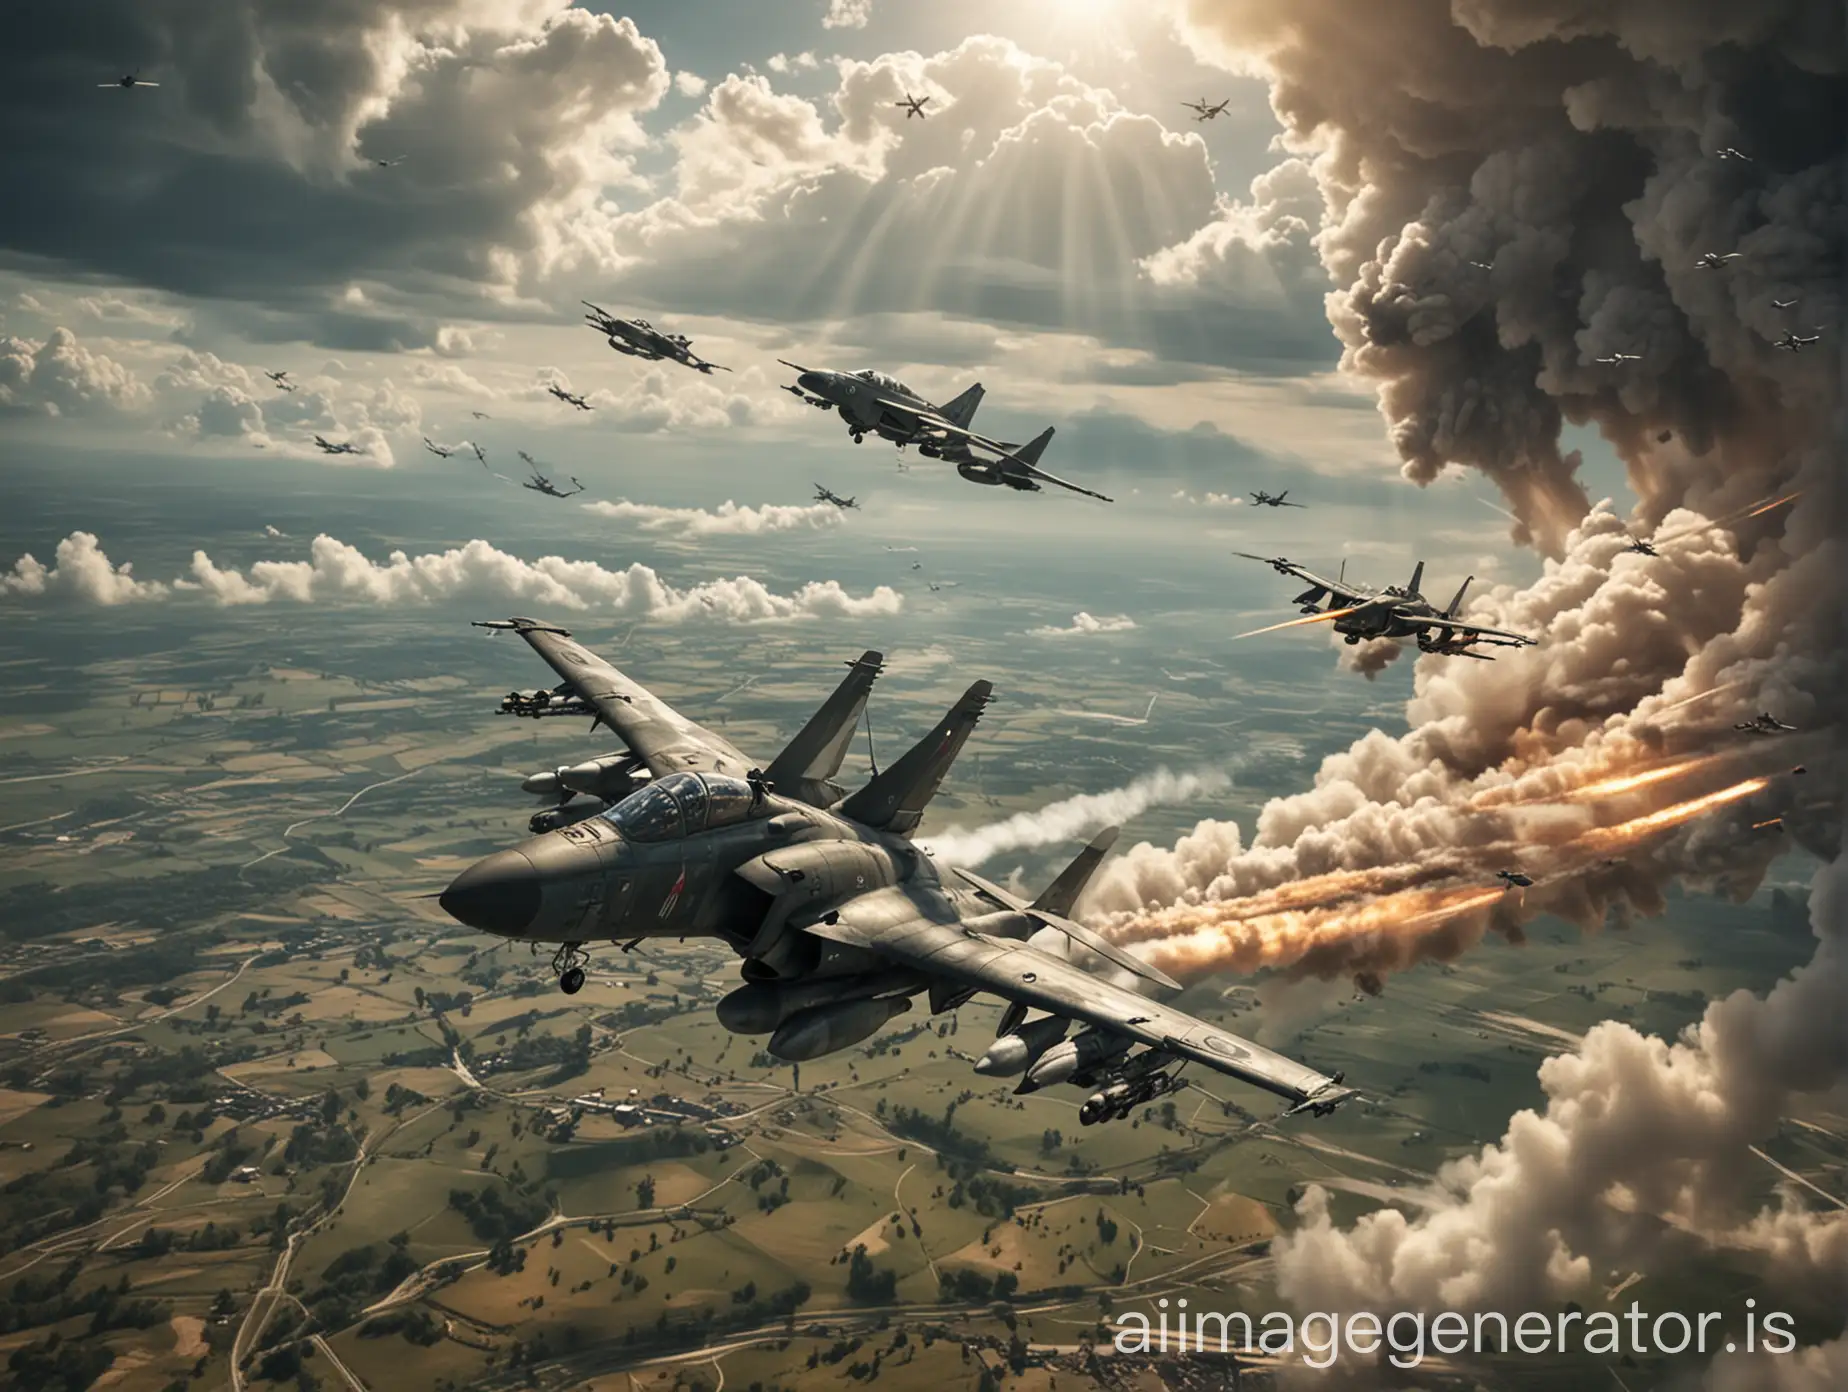 landscape full HD atmosphere of war in the air with fighter planes, there is one soldier